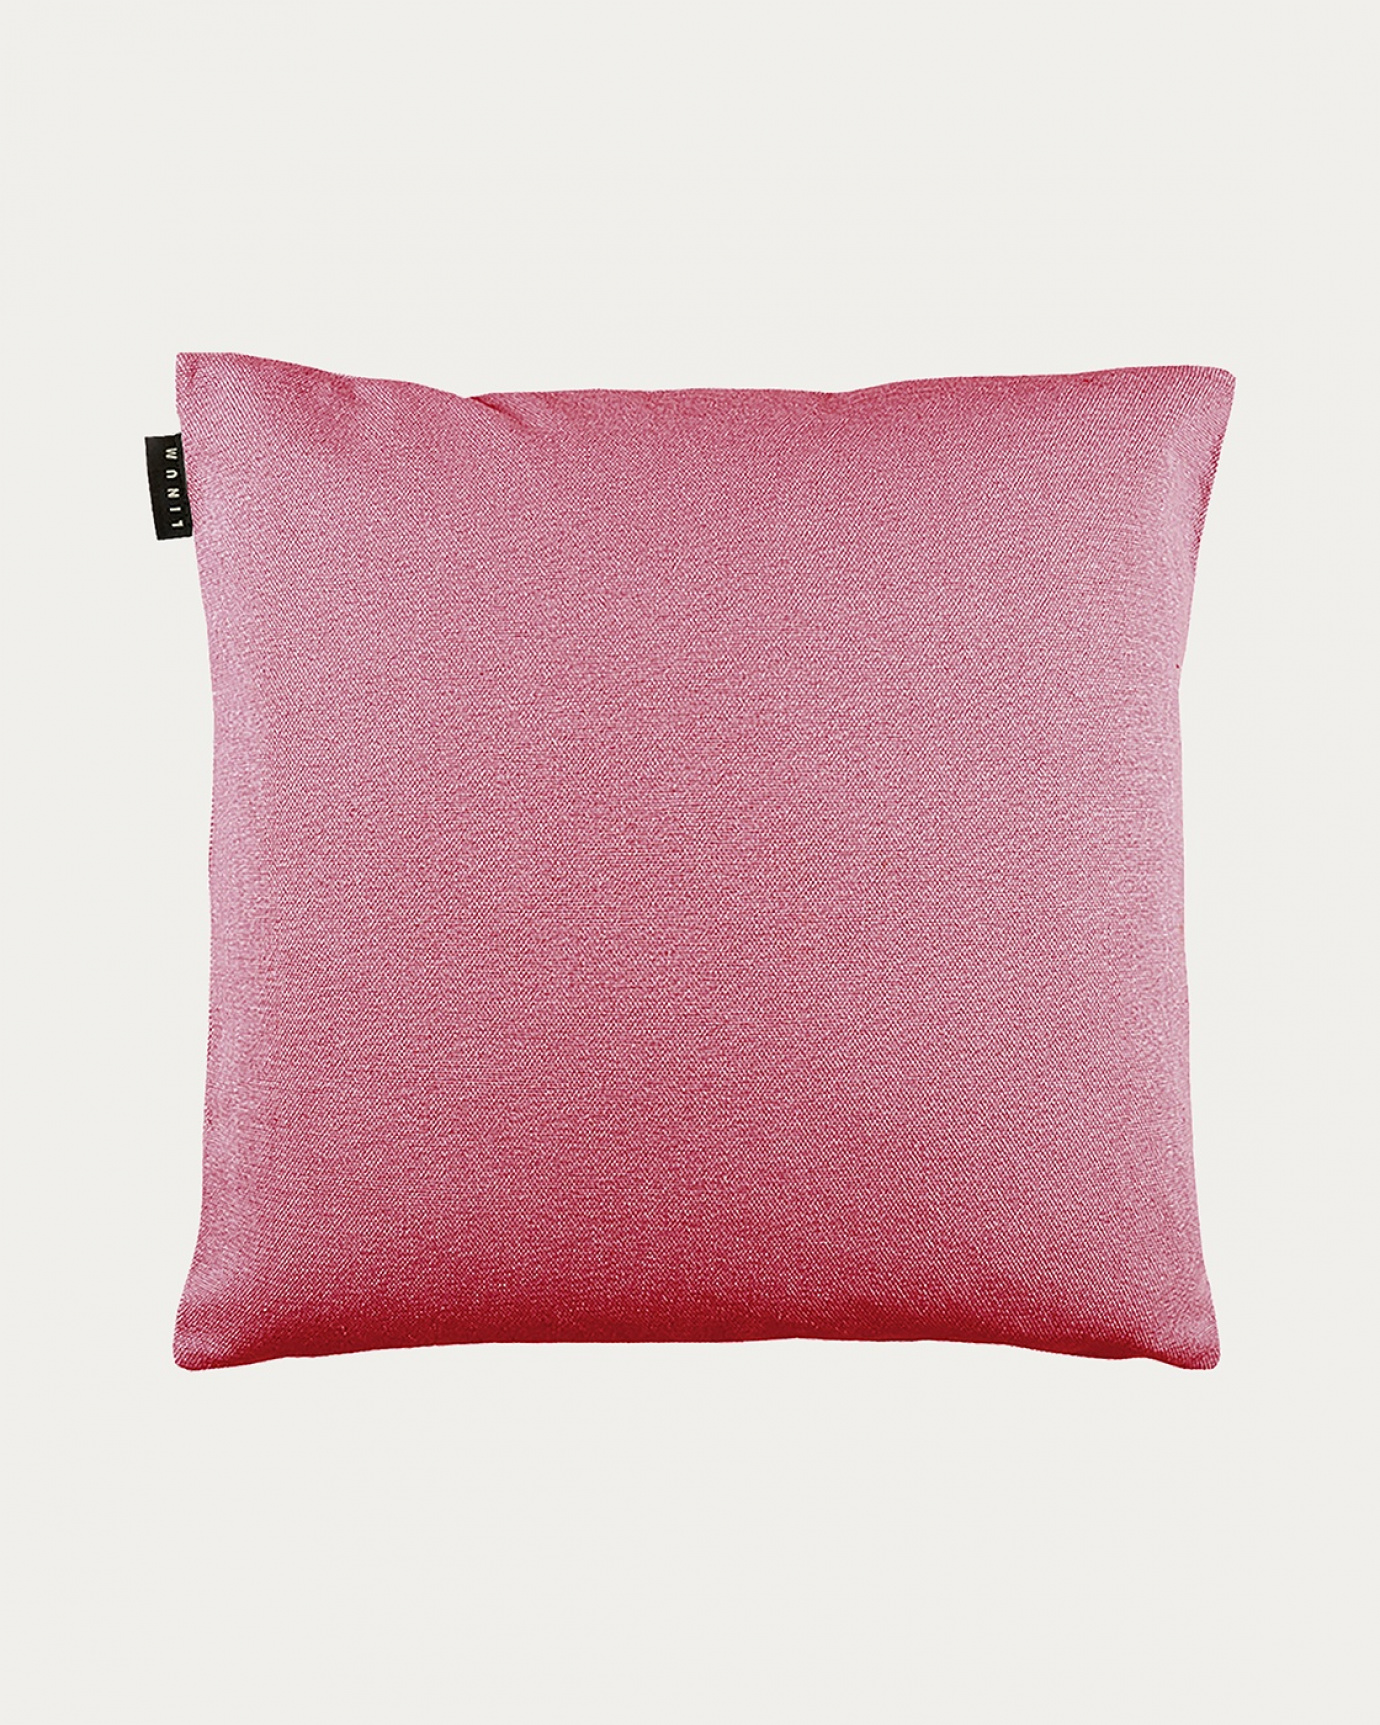 Product image cerise red PEPPER cushion cover made of soft cotton from LINUM DESIGN. Easy to wash and durable for generations. Size 50x50 cm.